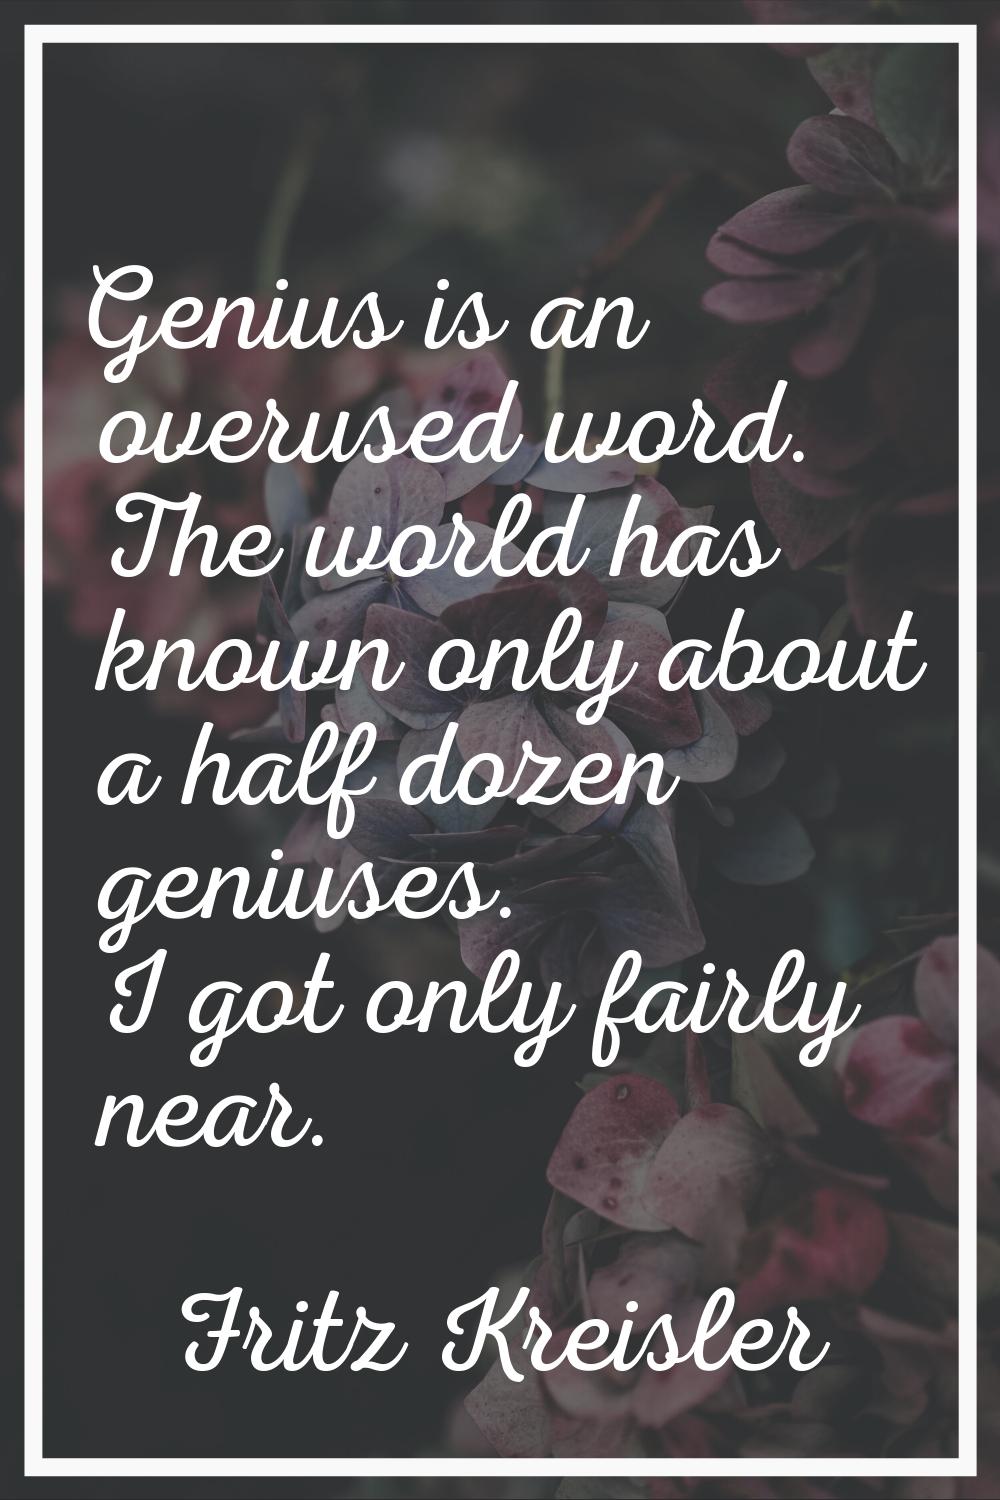 Genius is an overused word. The world has known only about a half dozen geniuses. I got only fairly